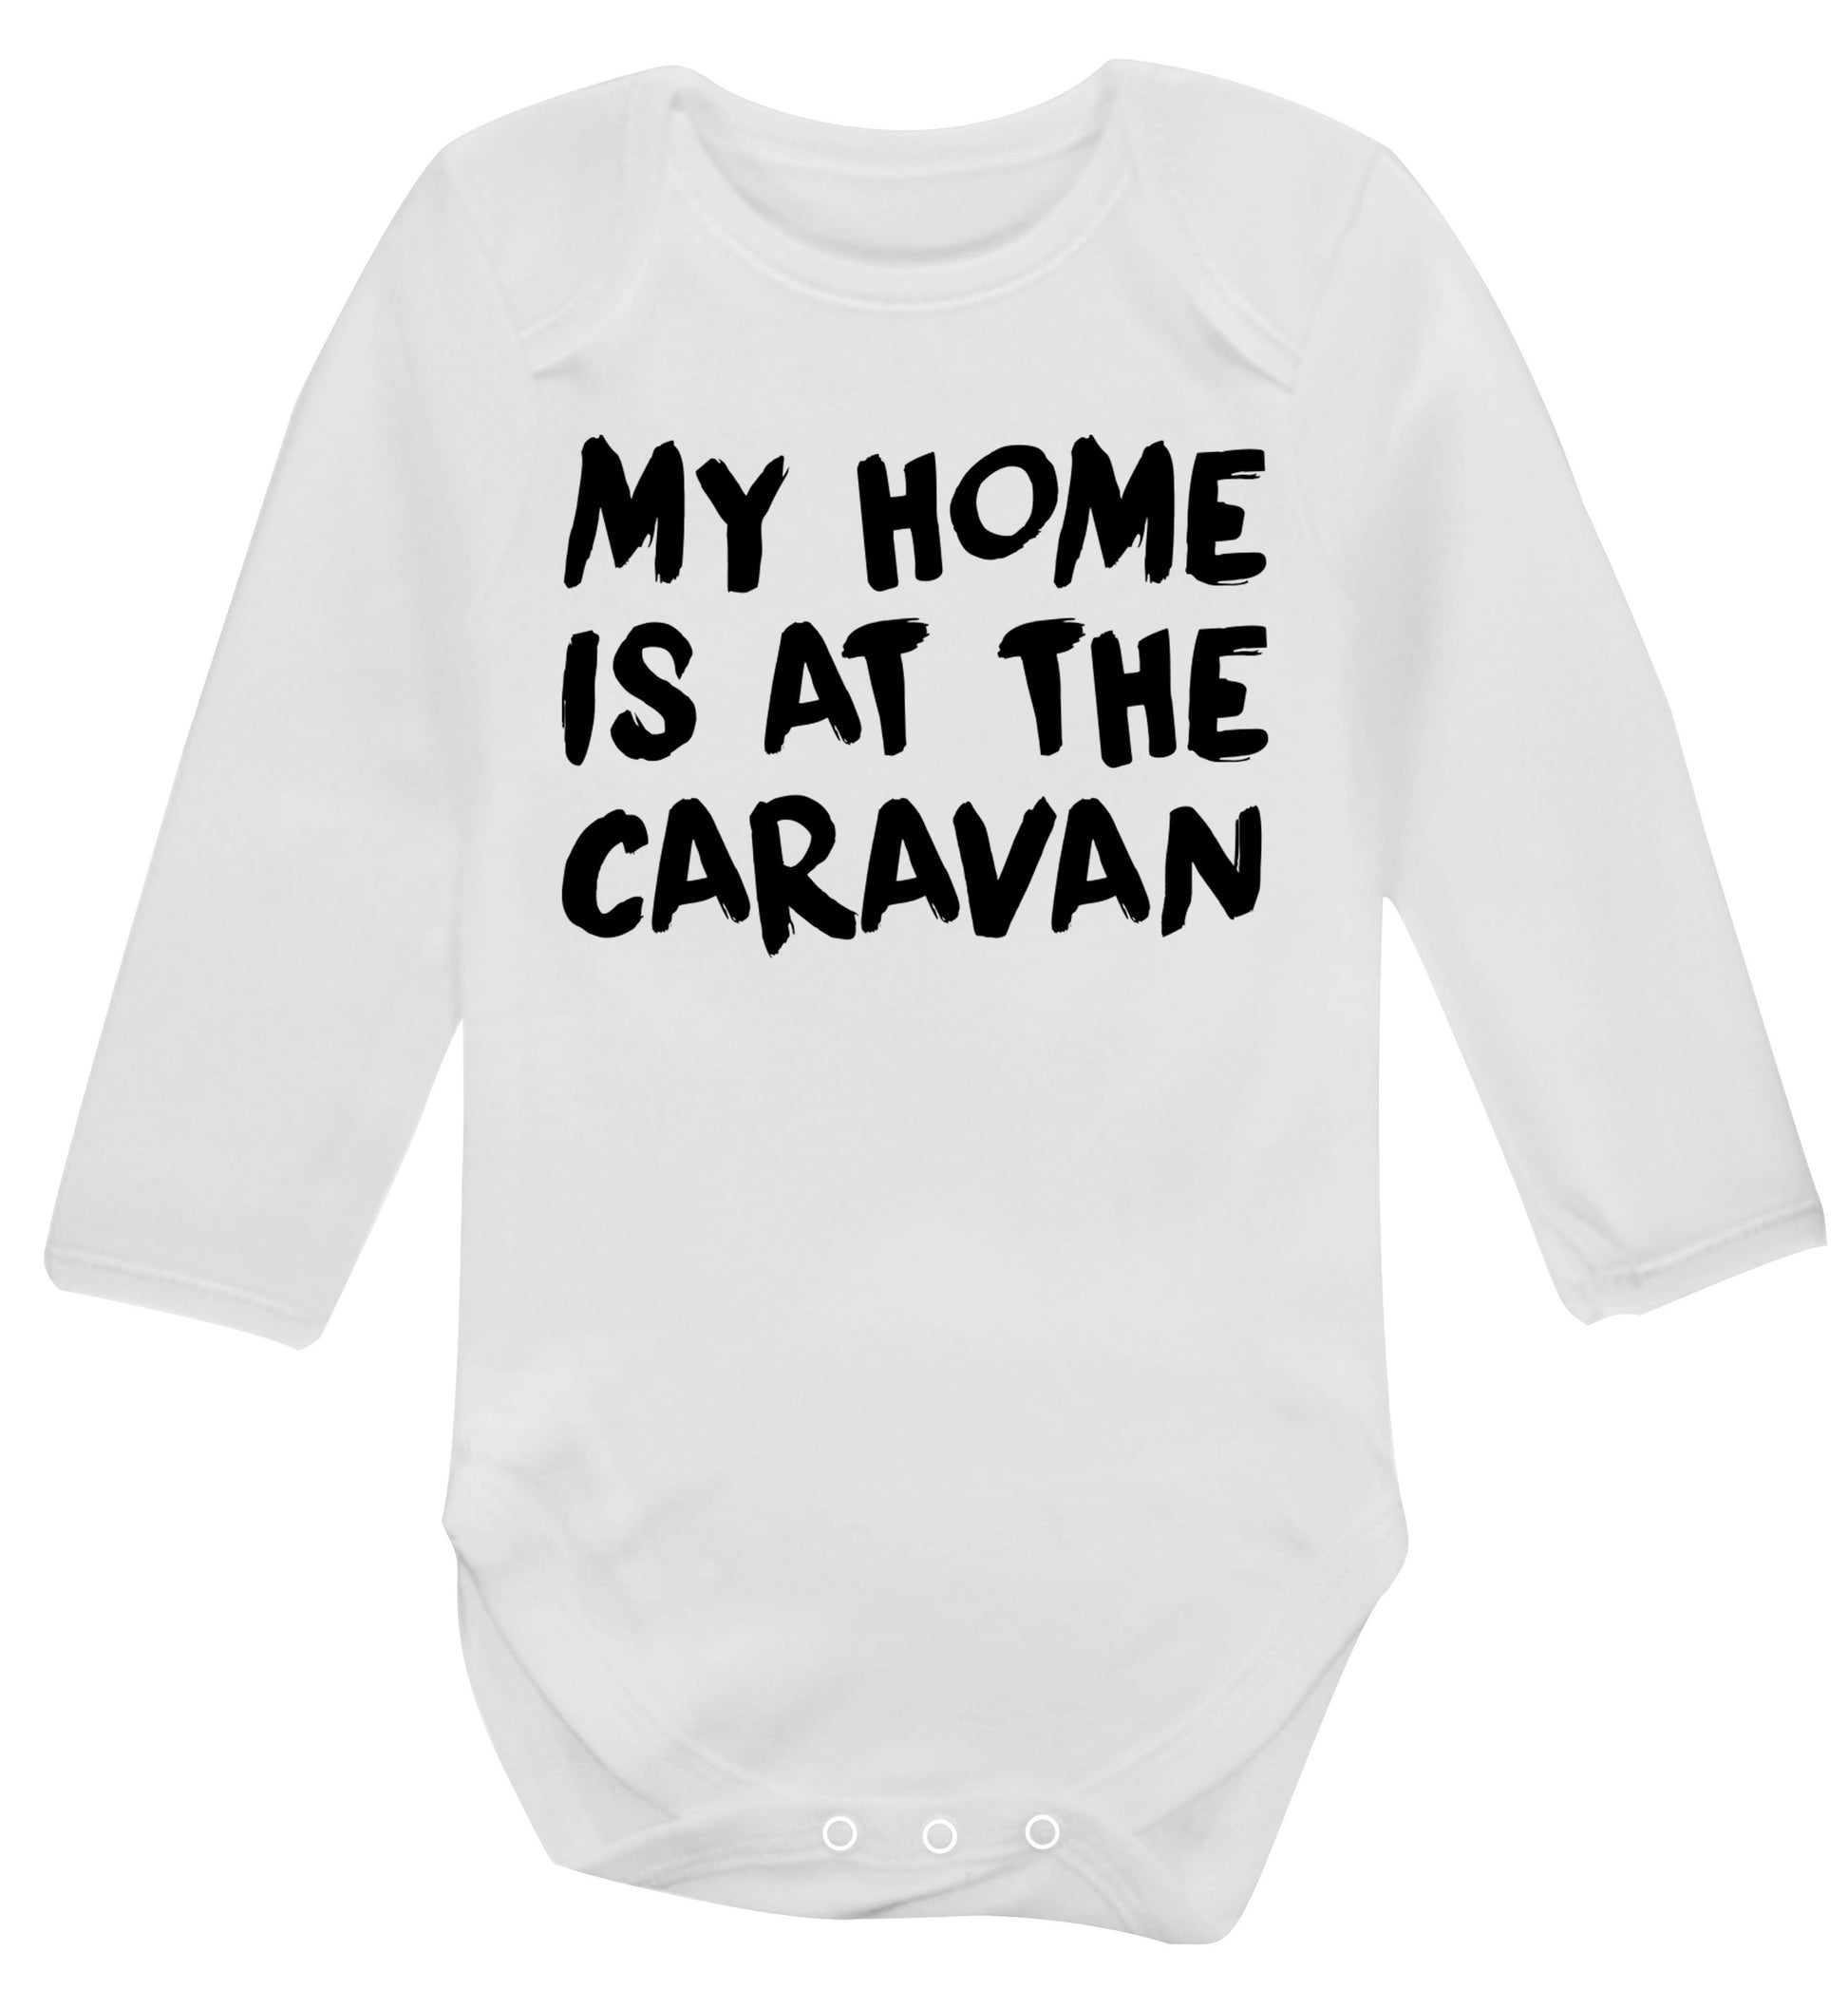 My home is at the caravan Baby Vest long sleeved white 6-12 months